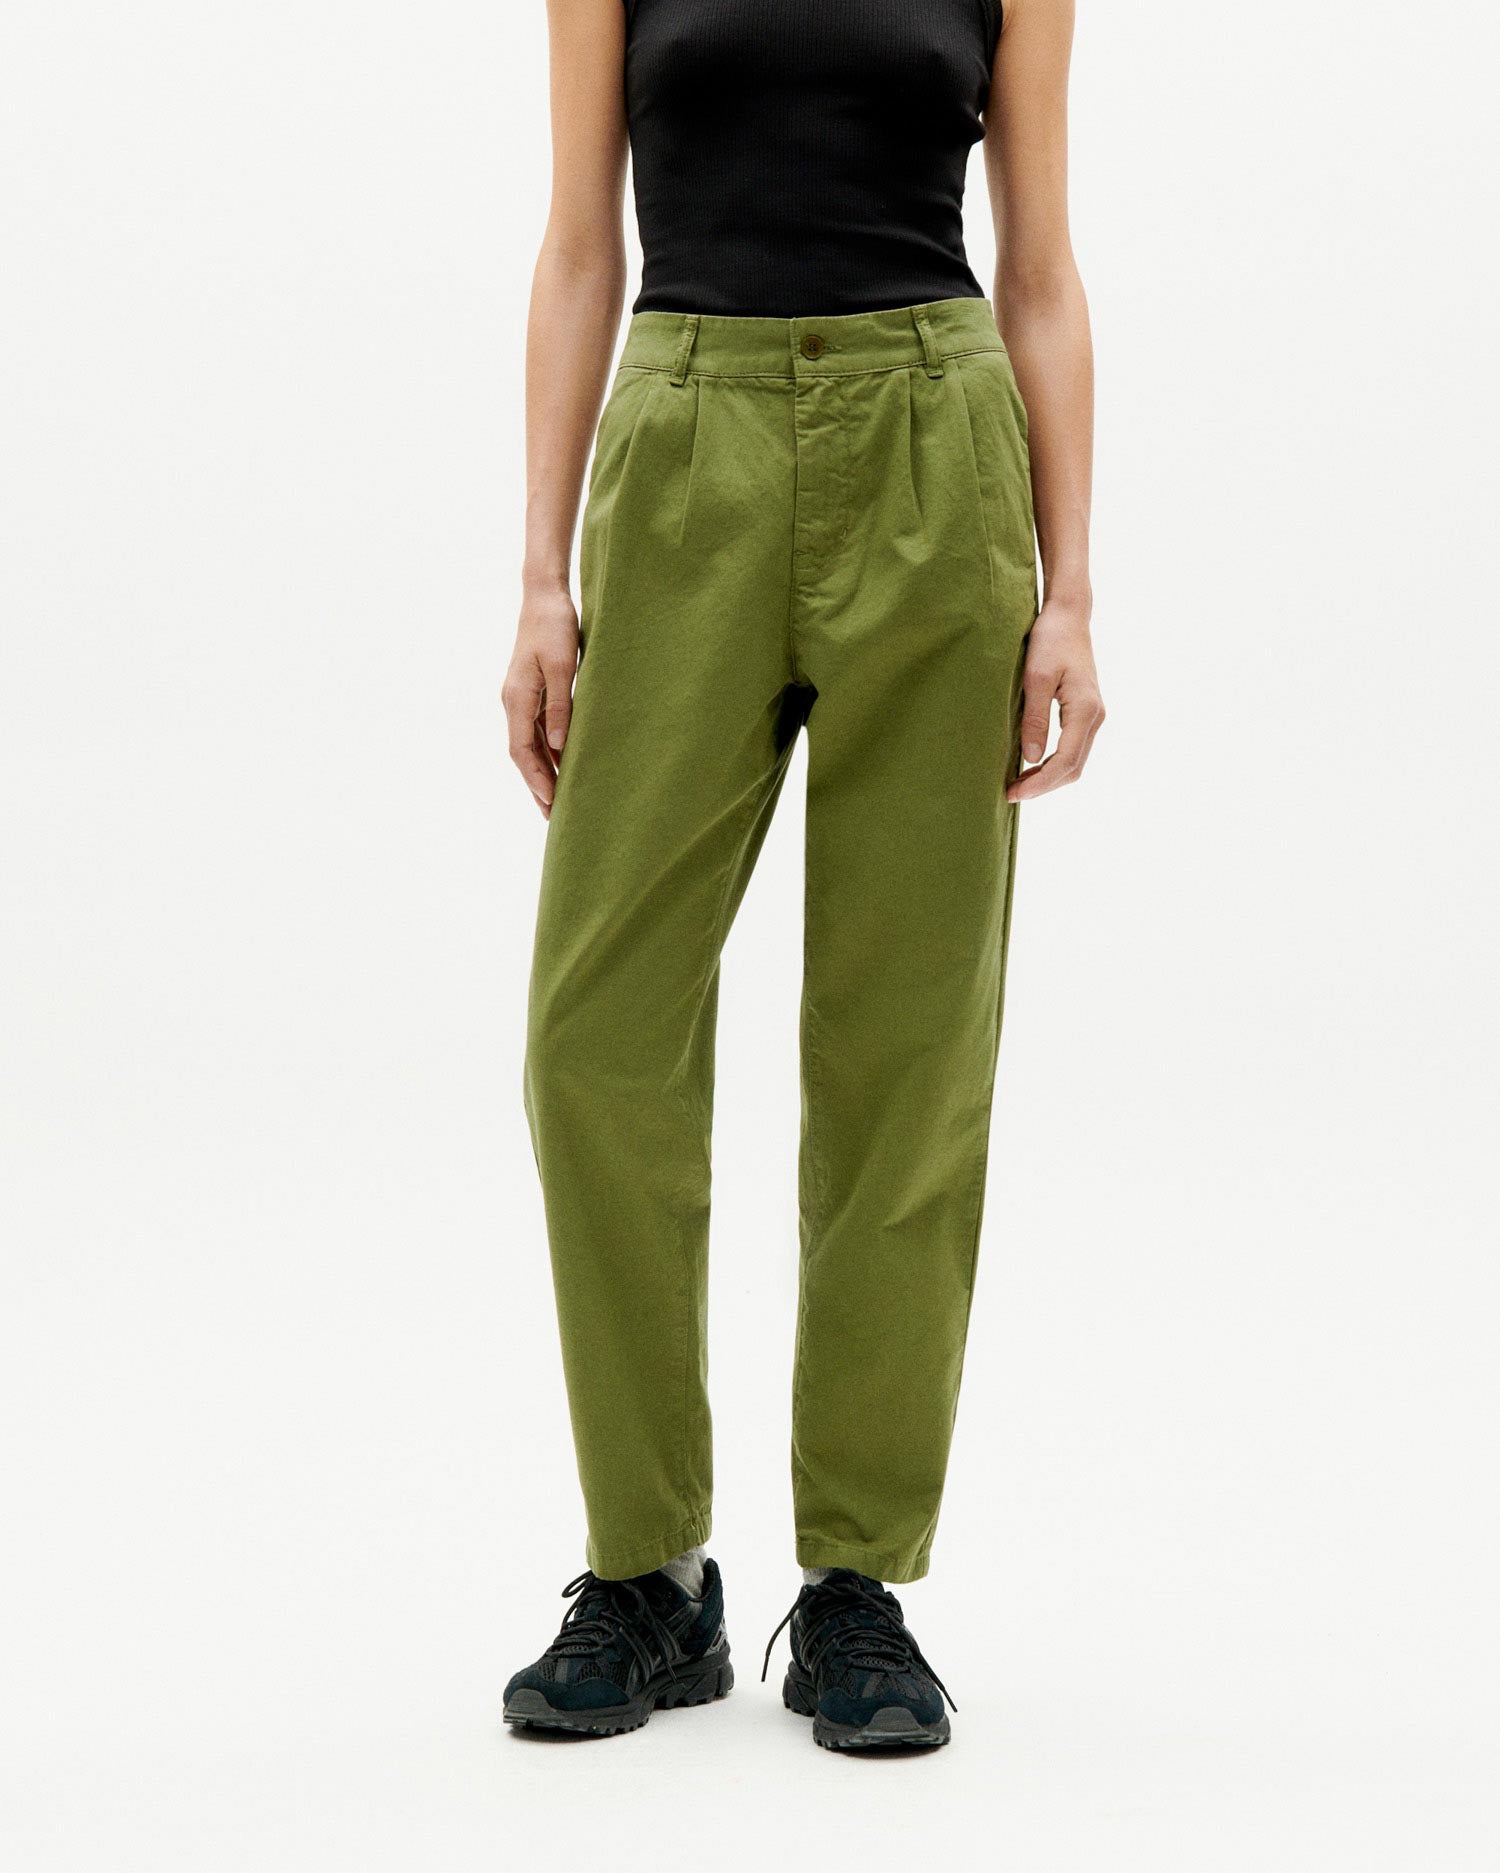 Women's Sustainable Pants and Jeans